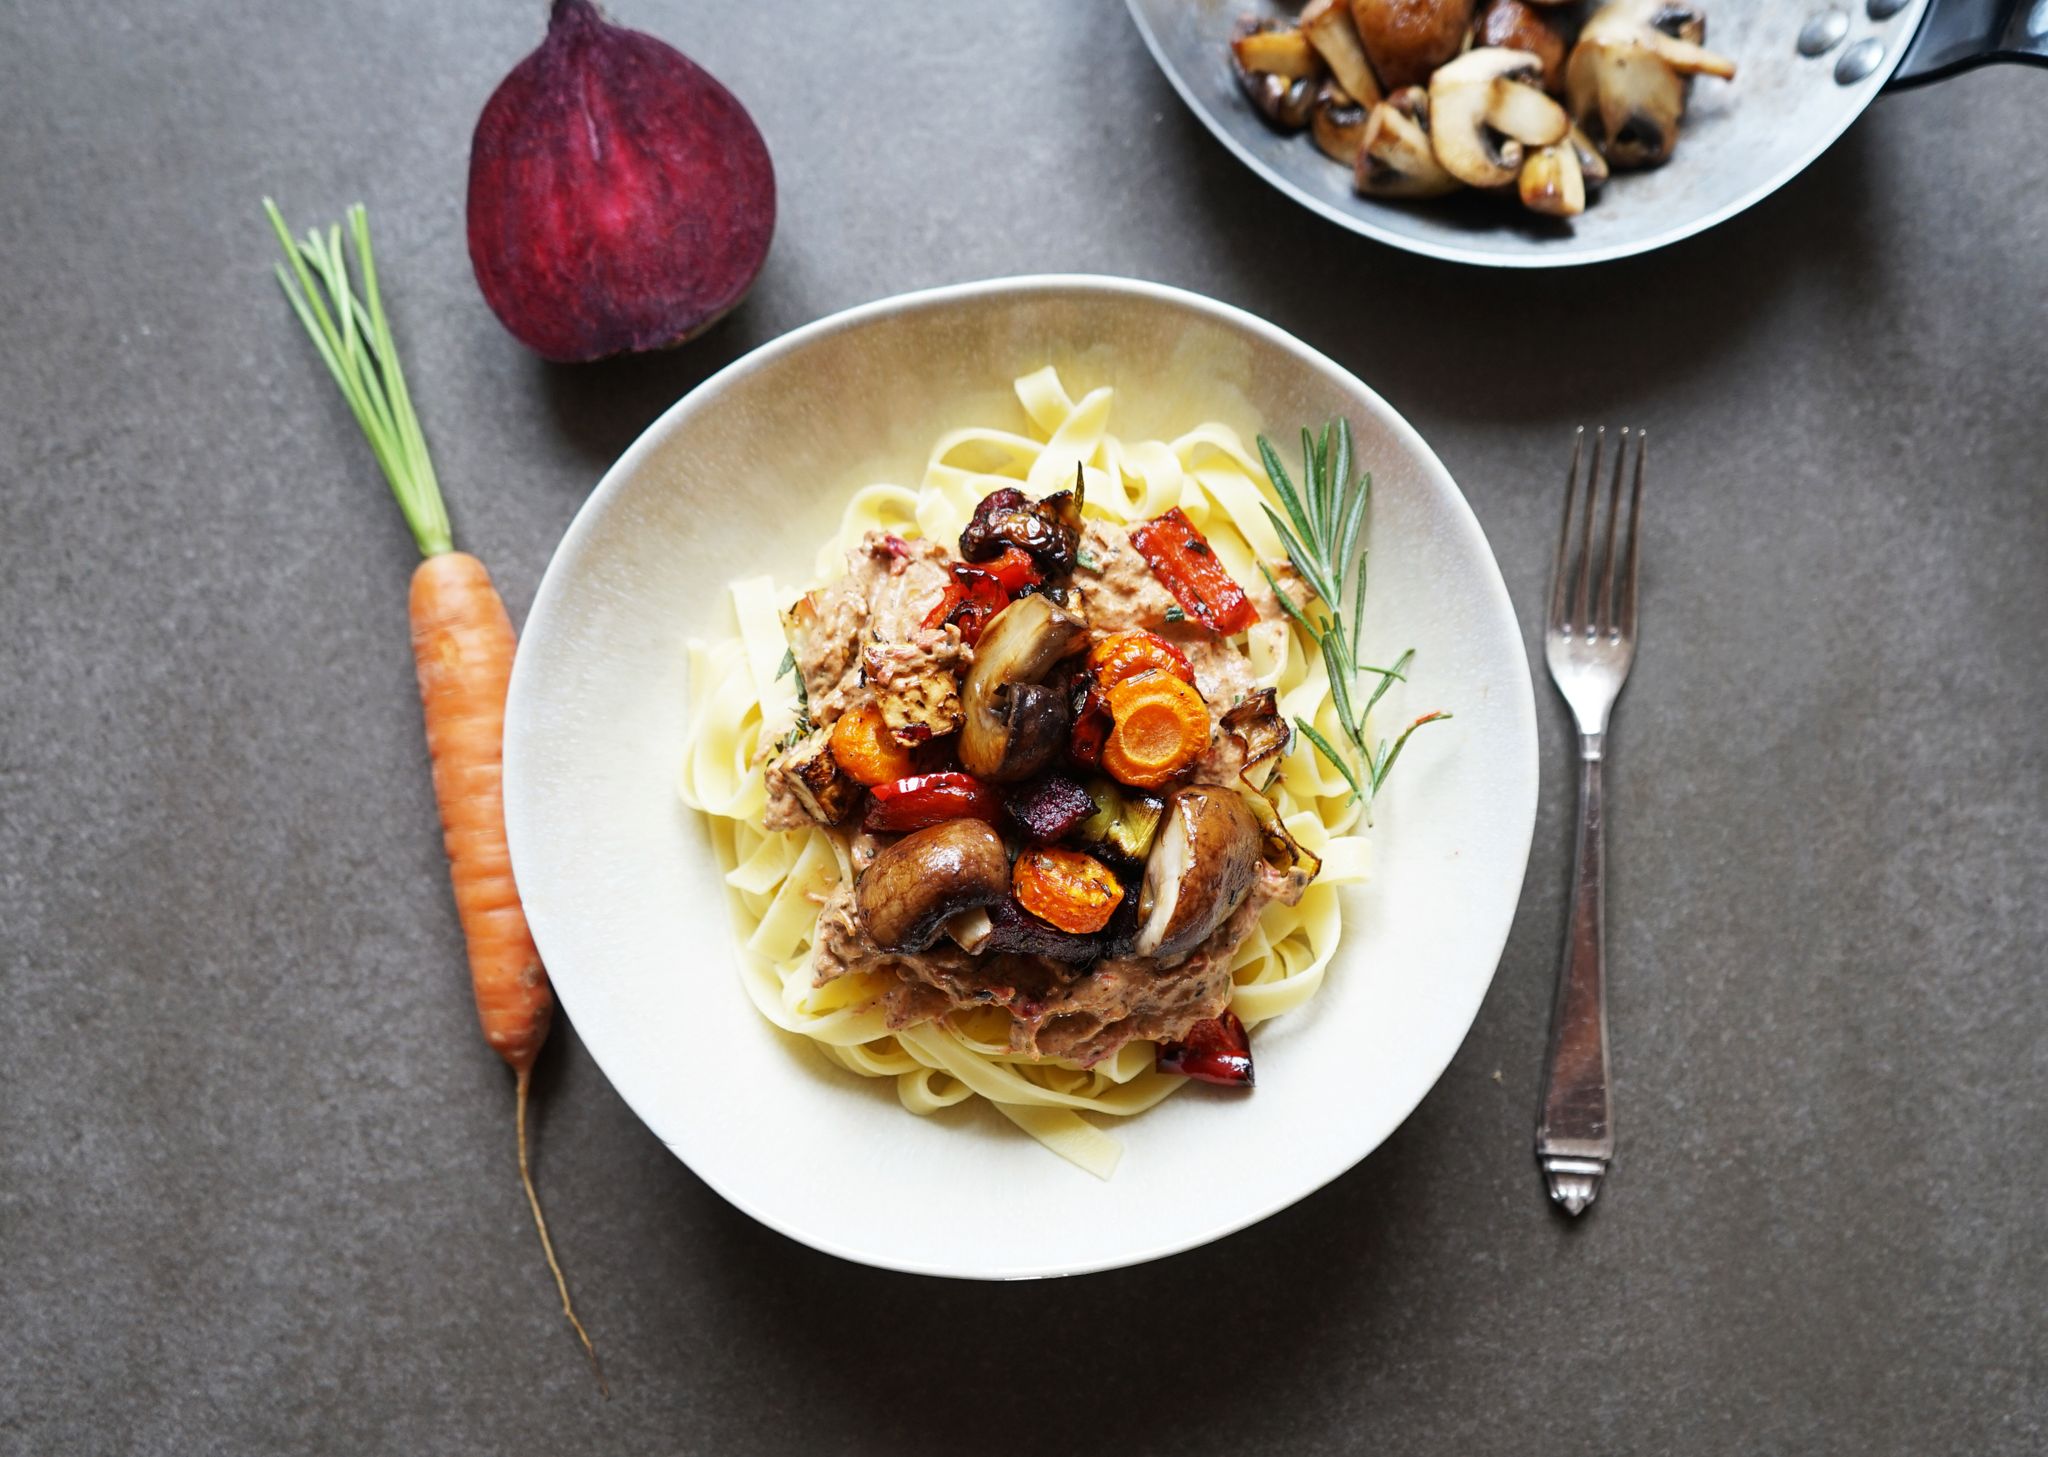 Roasted vegetables enhance their flavor and are ideal for a pasta dish (dpa)